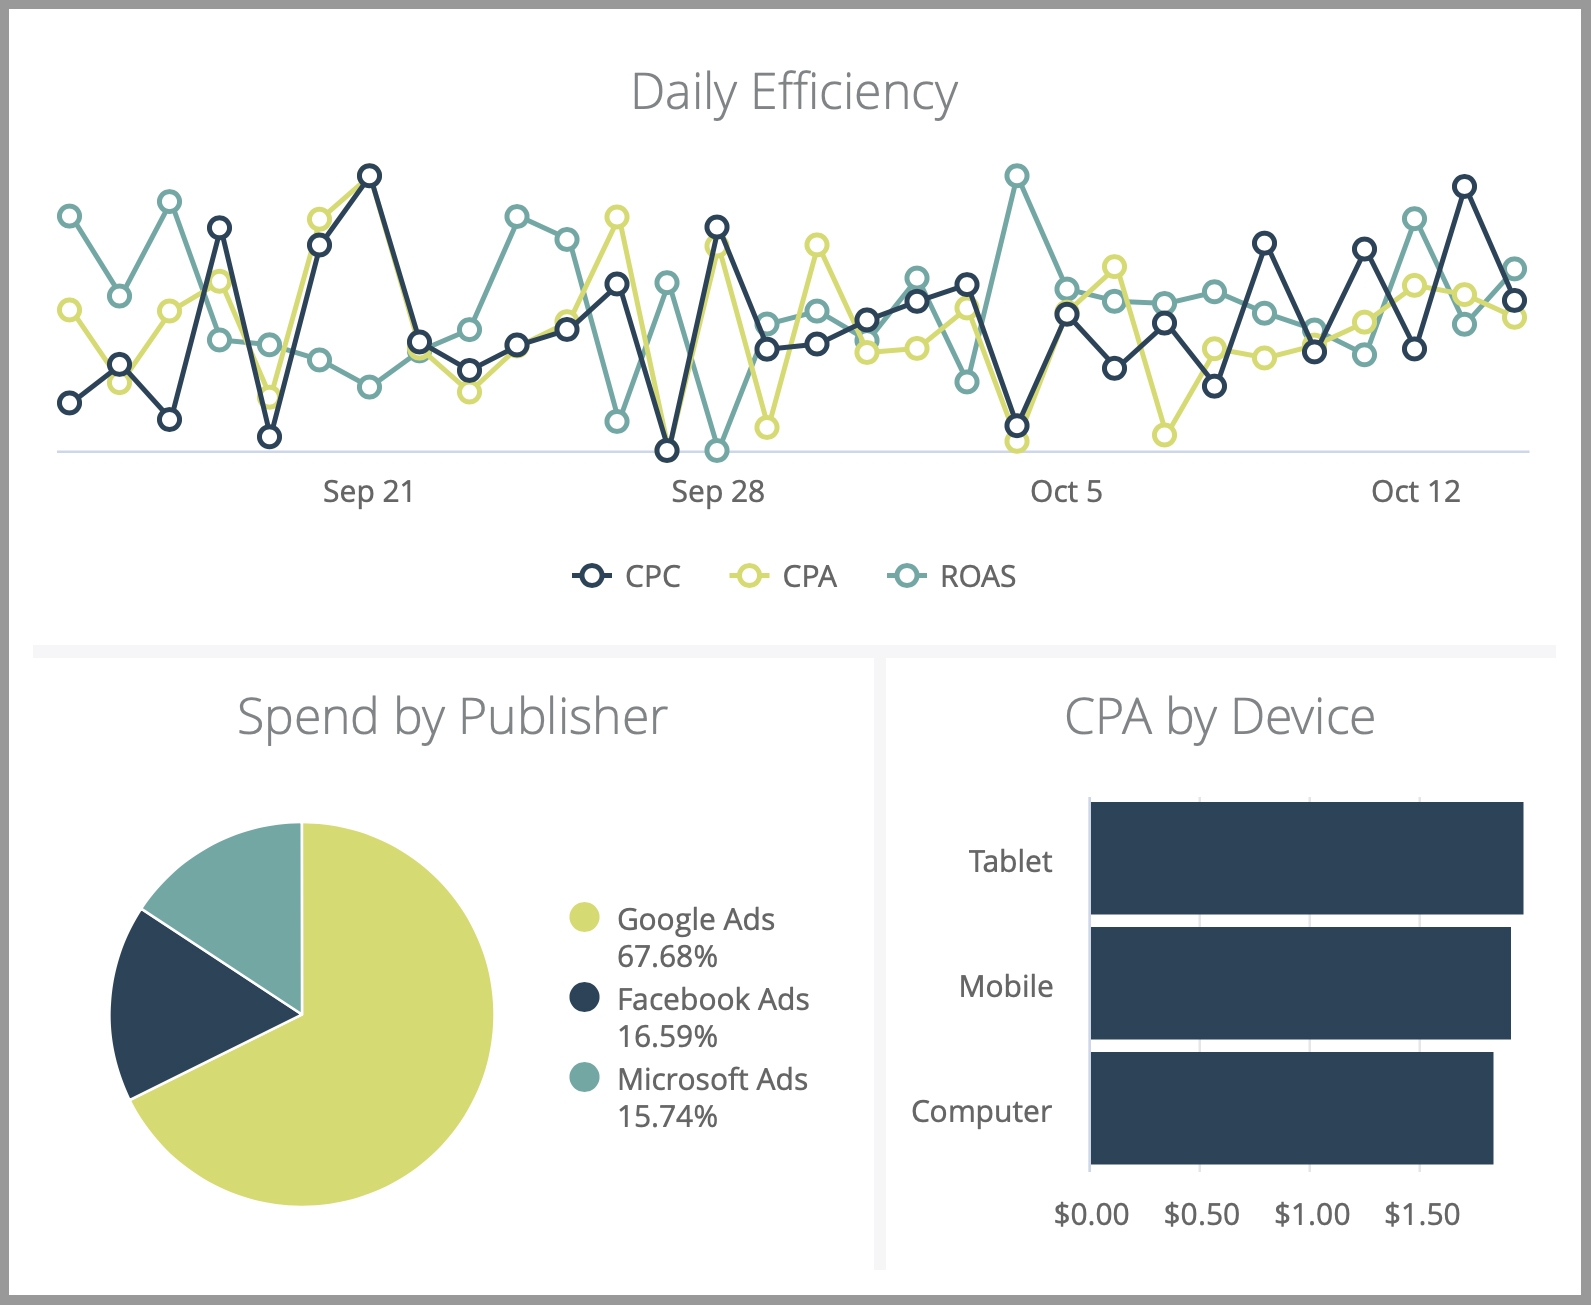 Marketing Manager Dashboard Component #3: Daily Efficiency